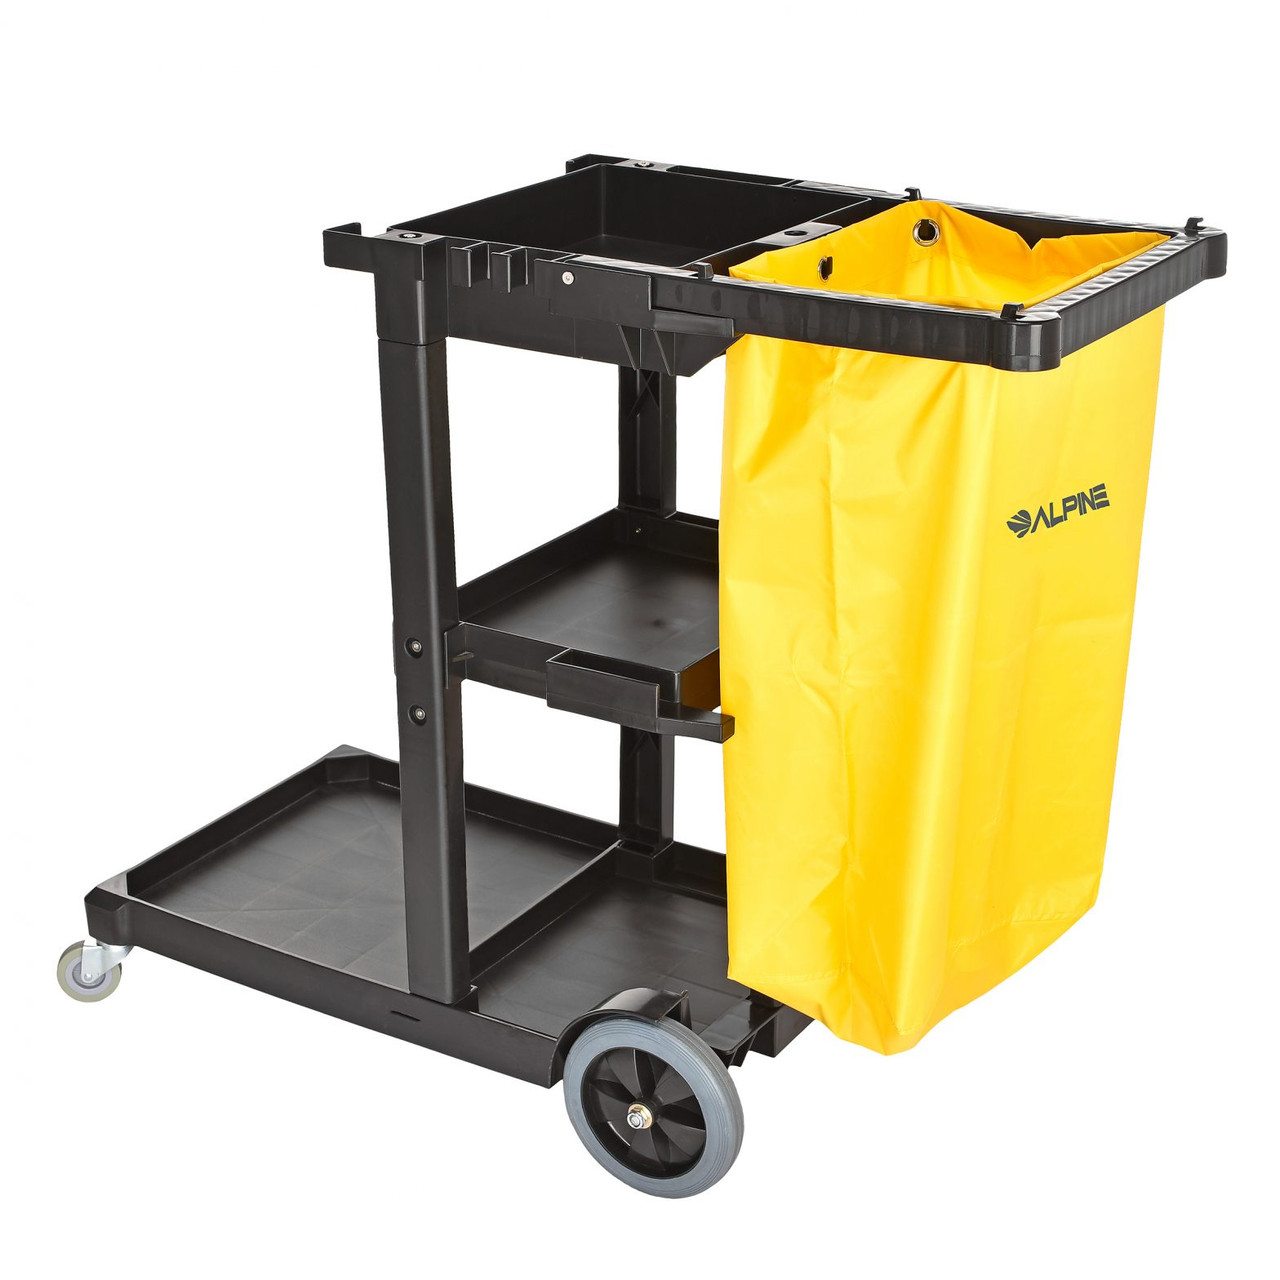 Janitorial Cleaning Cart / Janitor Cart with 3 Shelves and Vinyl